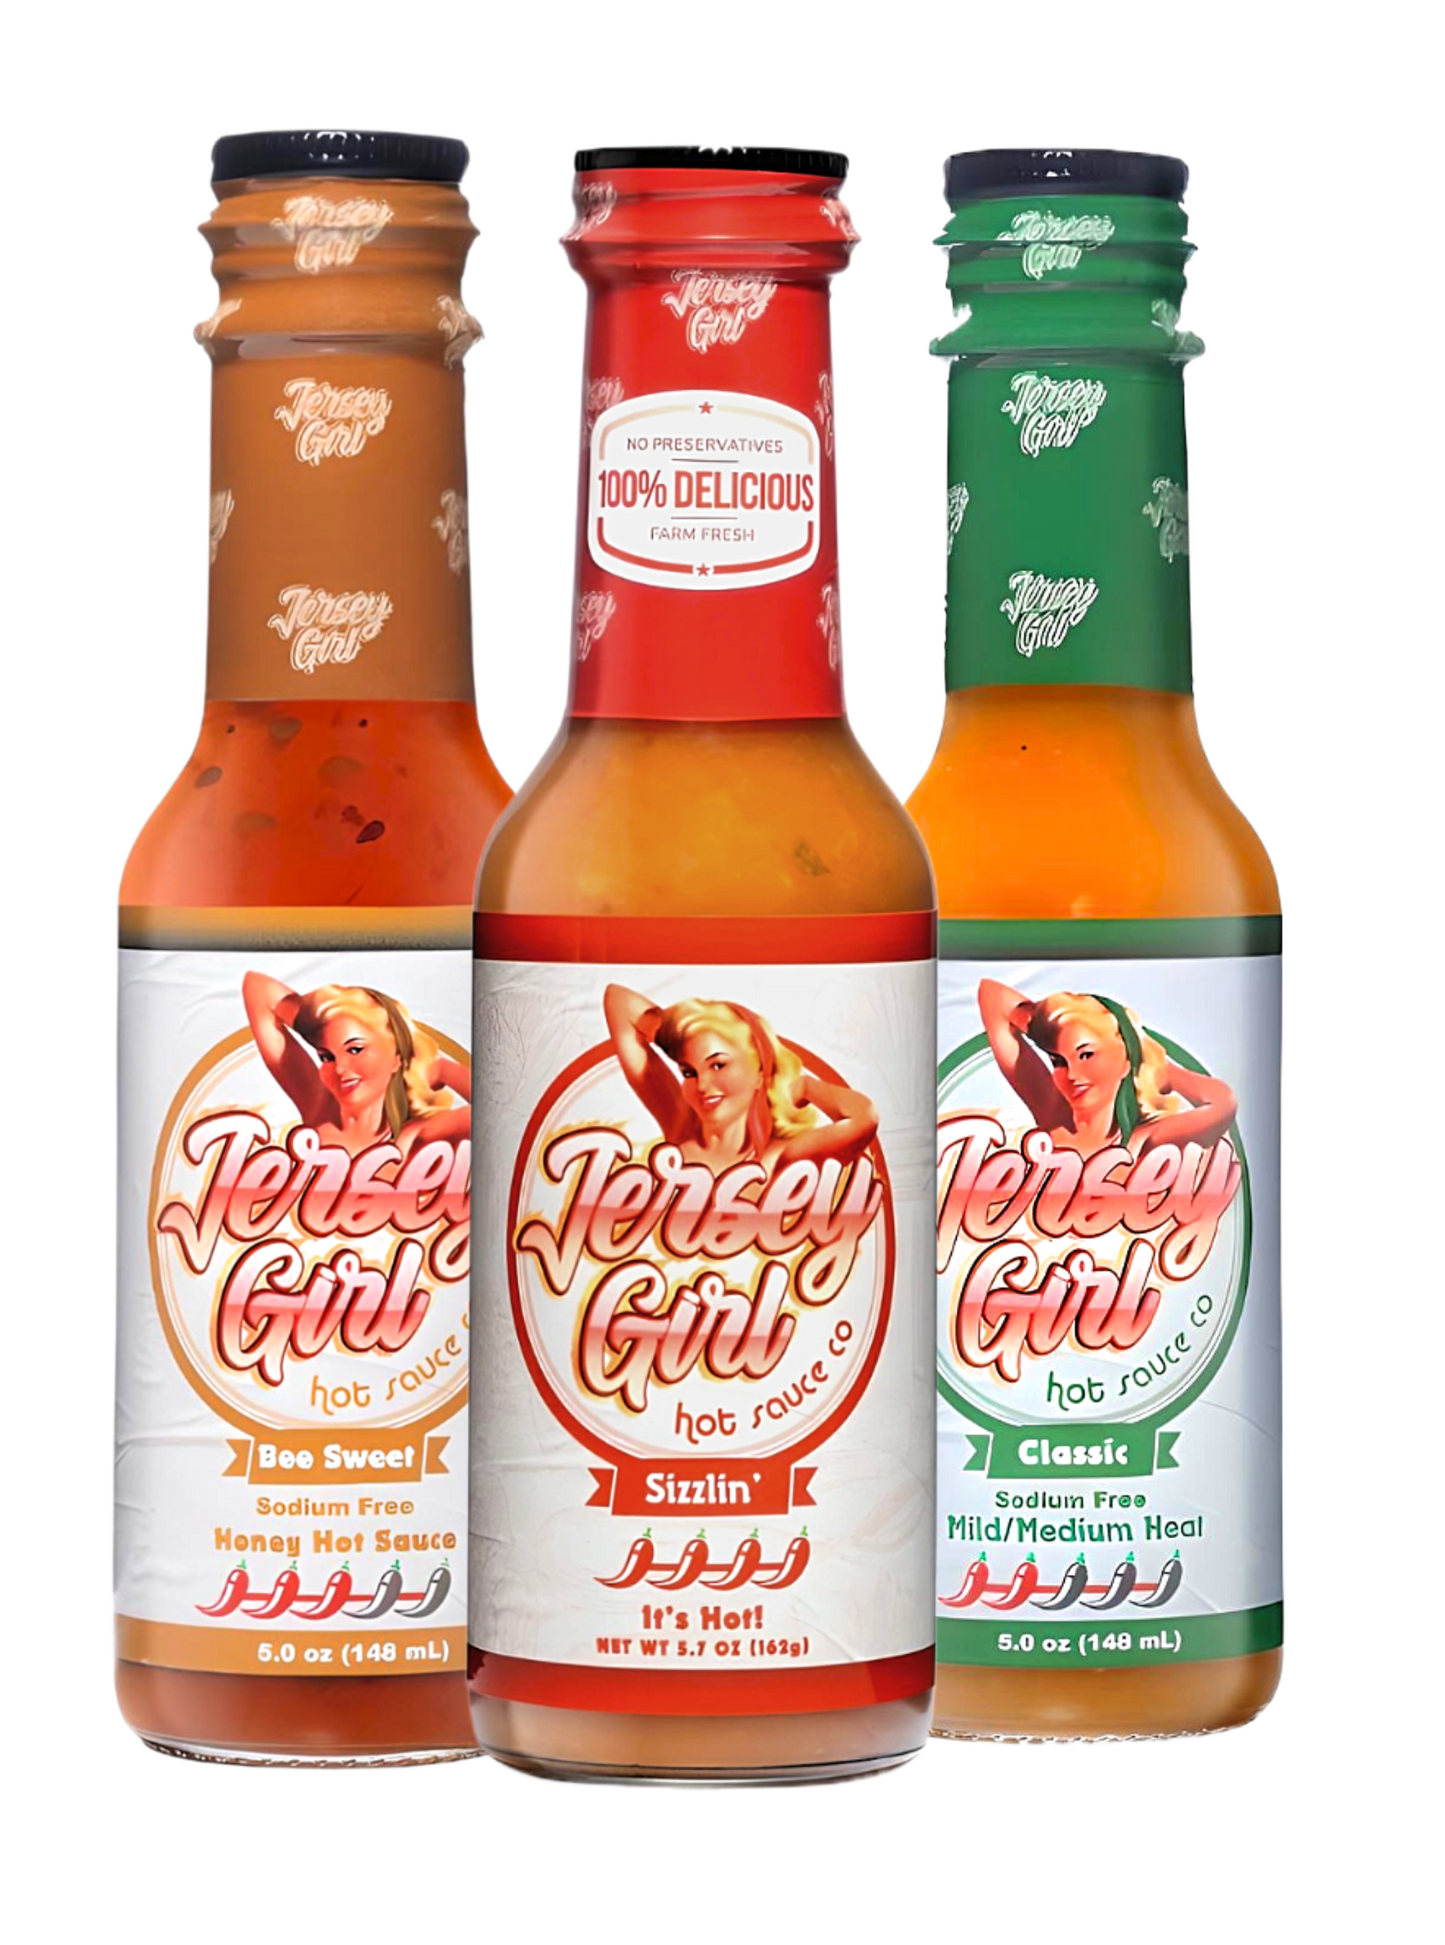 Jersey Girl Variety Pack - Bee Sweet, Sizzlin, Classic